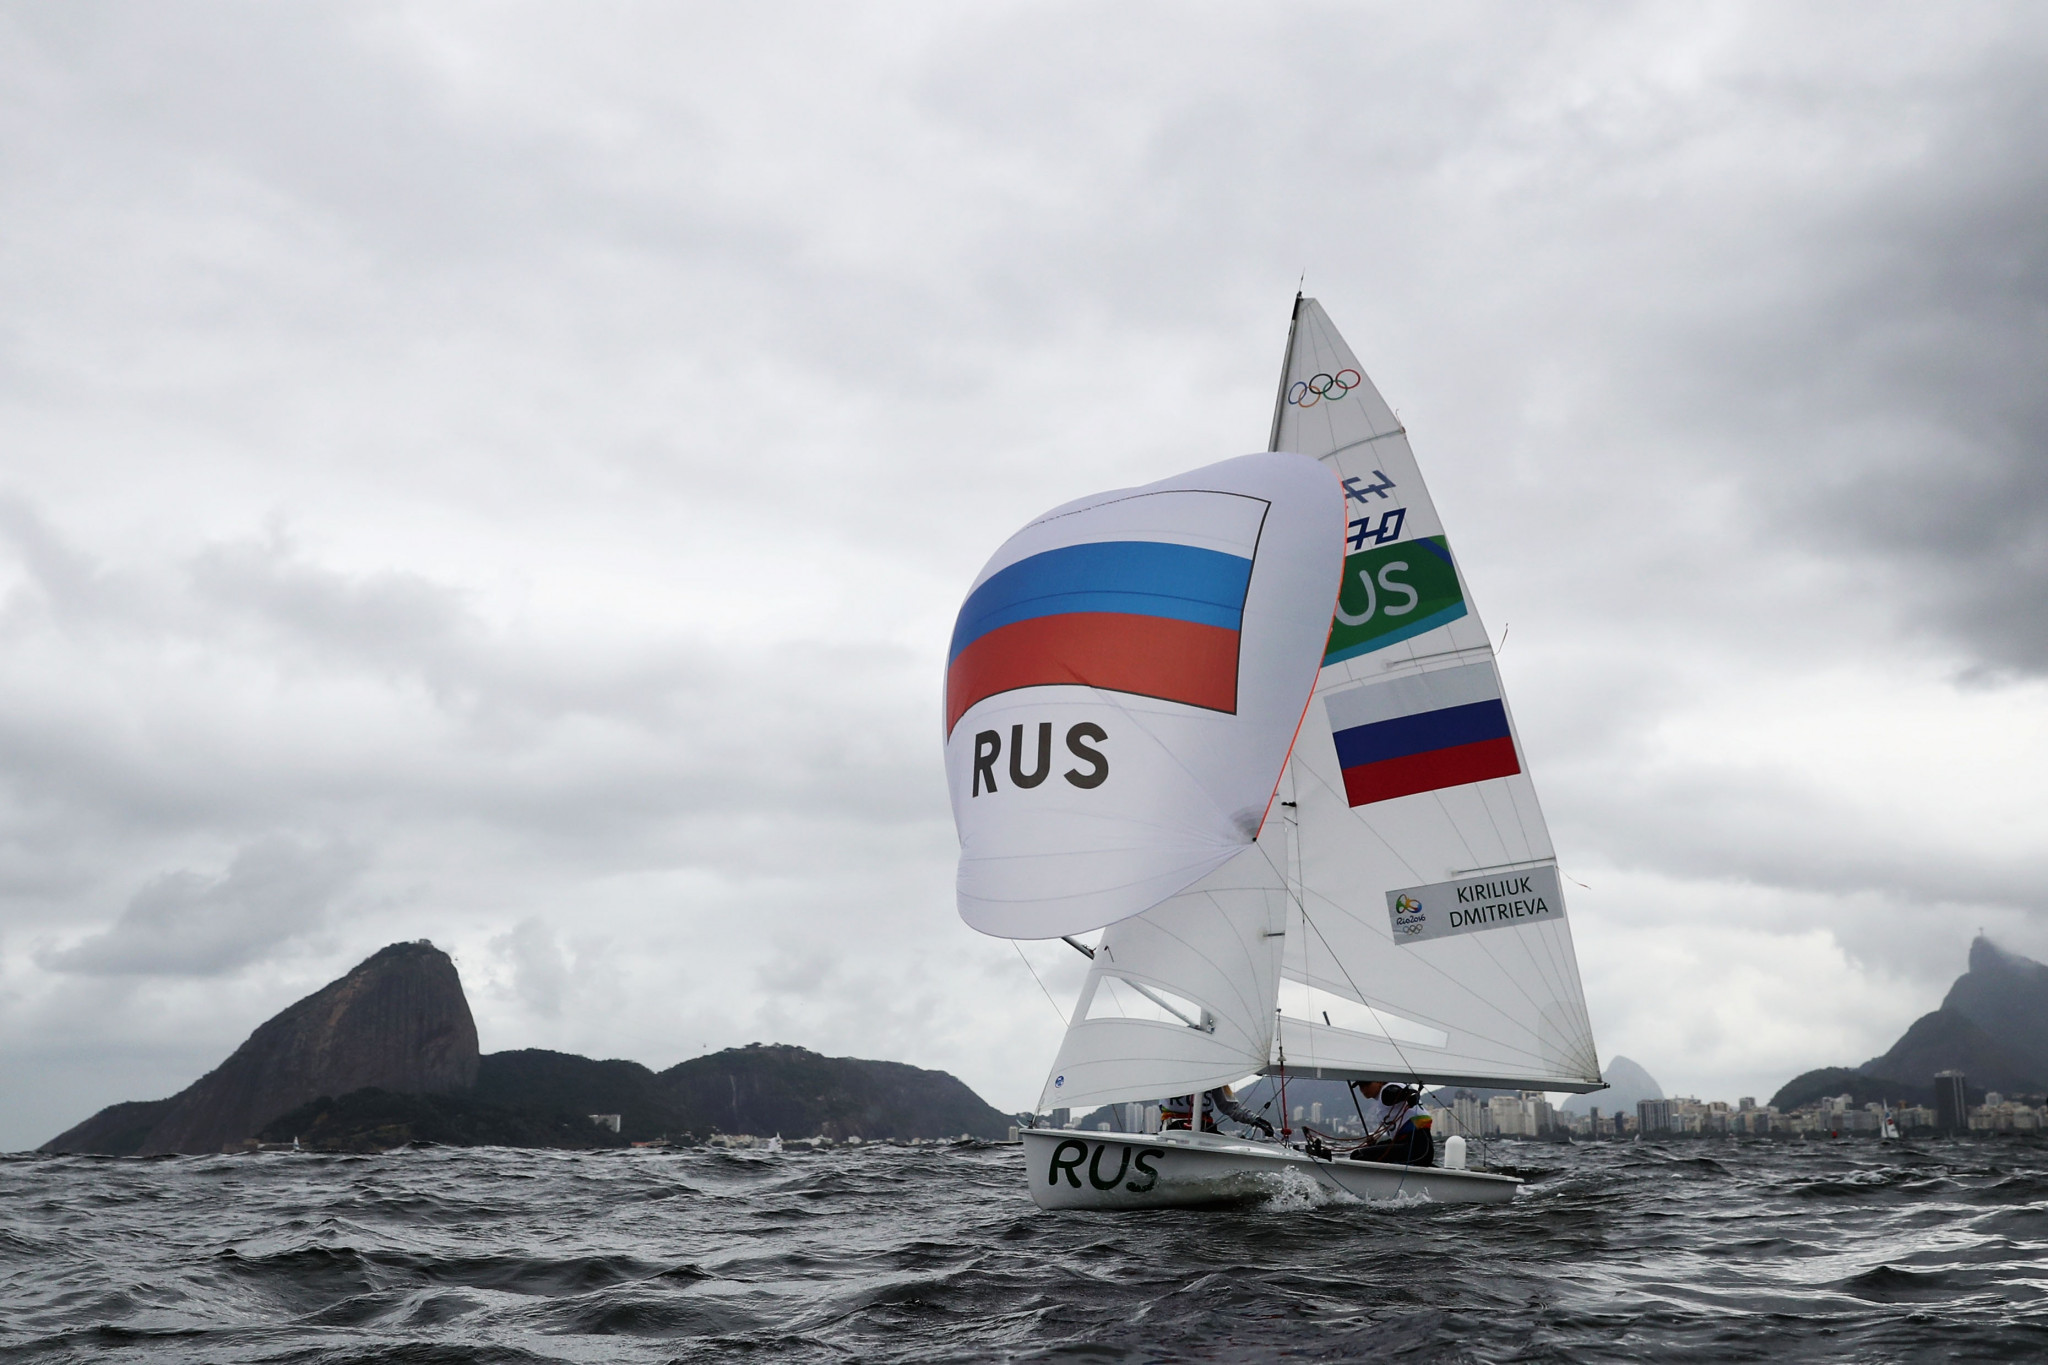 Russian official restored to World Sailing committee after administrative error